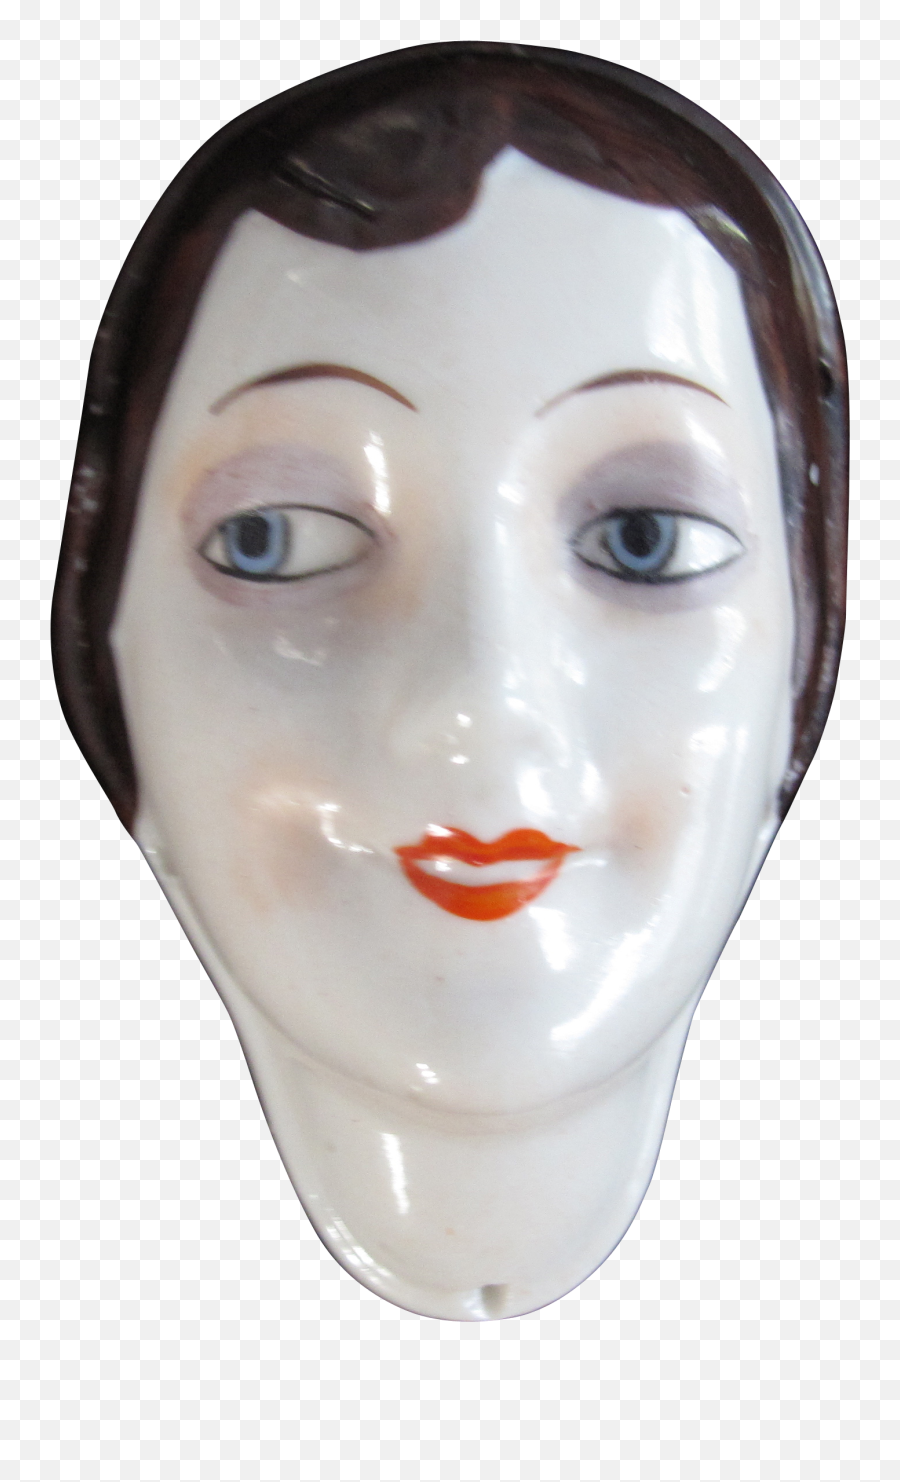 Chin Doll Face Mask Ruby Lane - Doll Png Download 2213 Doll Face Png Emoji,Emoji With Hand On Chin